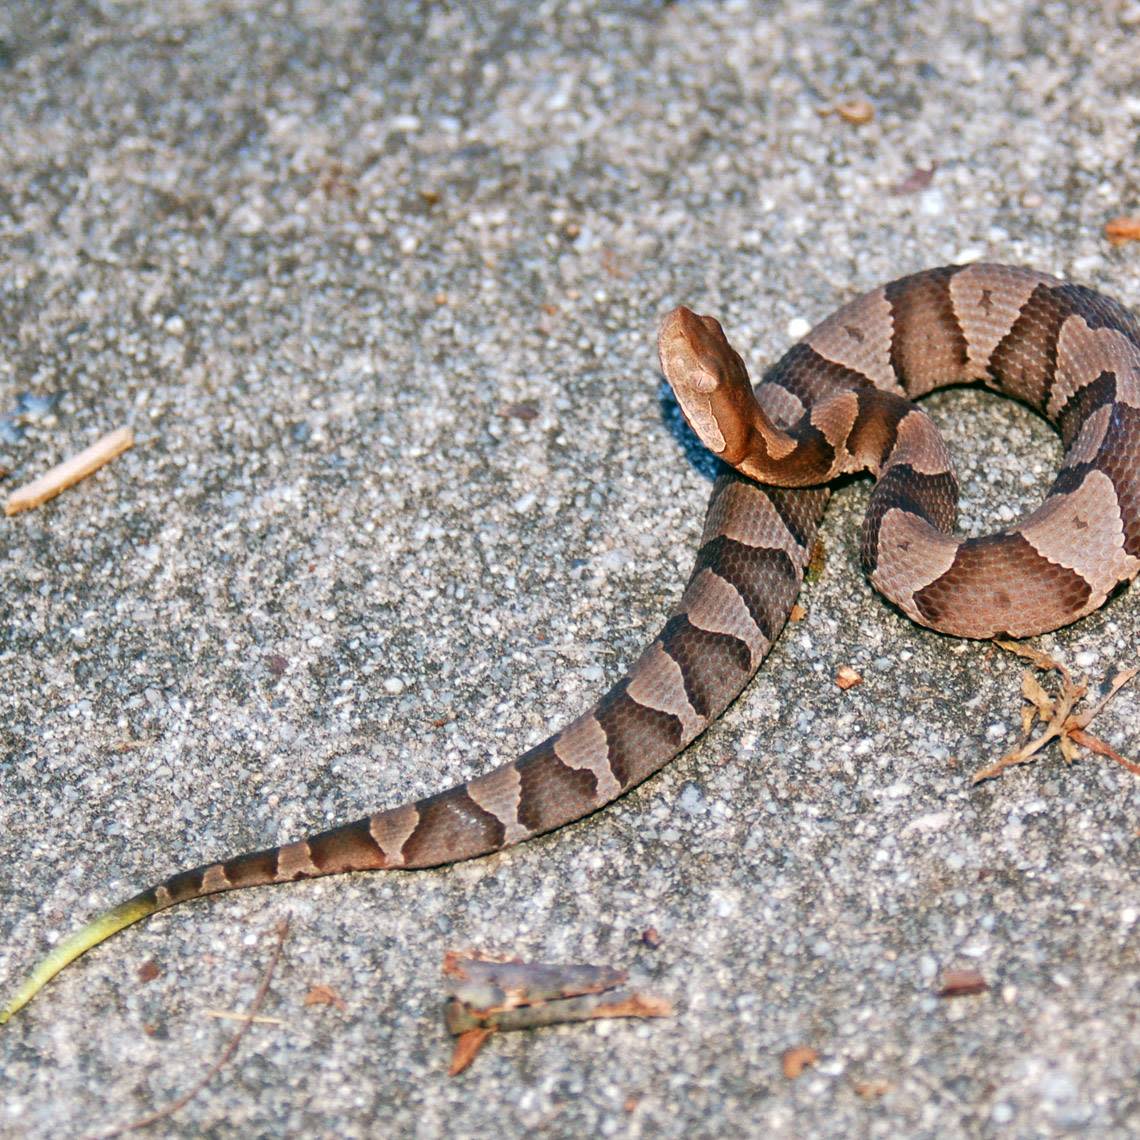 Juvenile copperhead. Note the yellow-tipped tail.